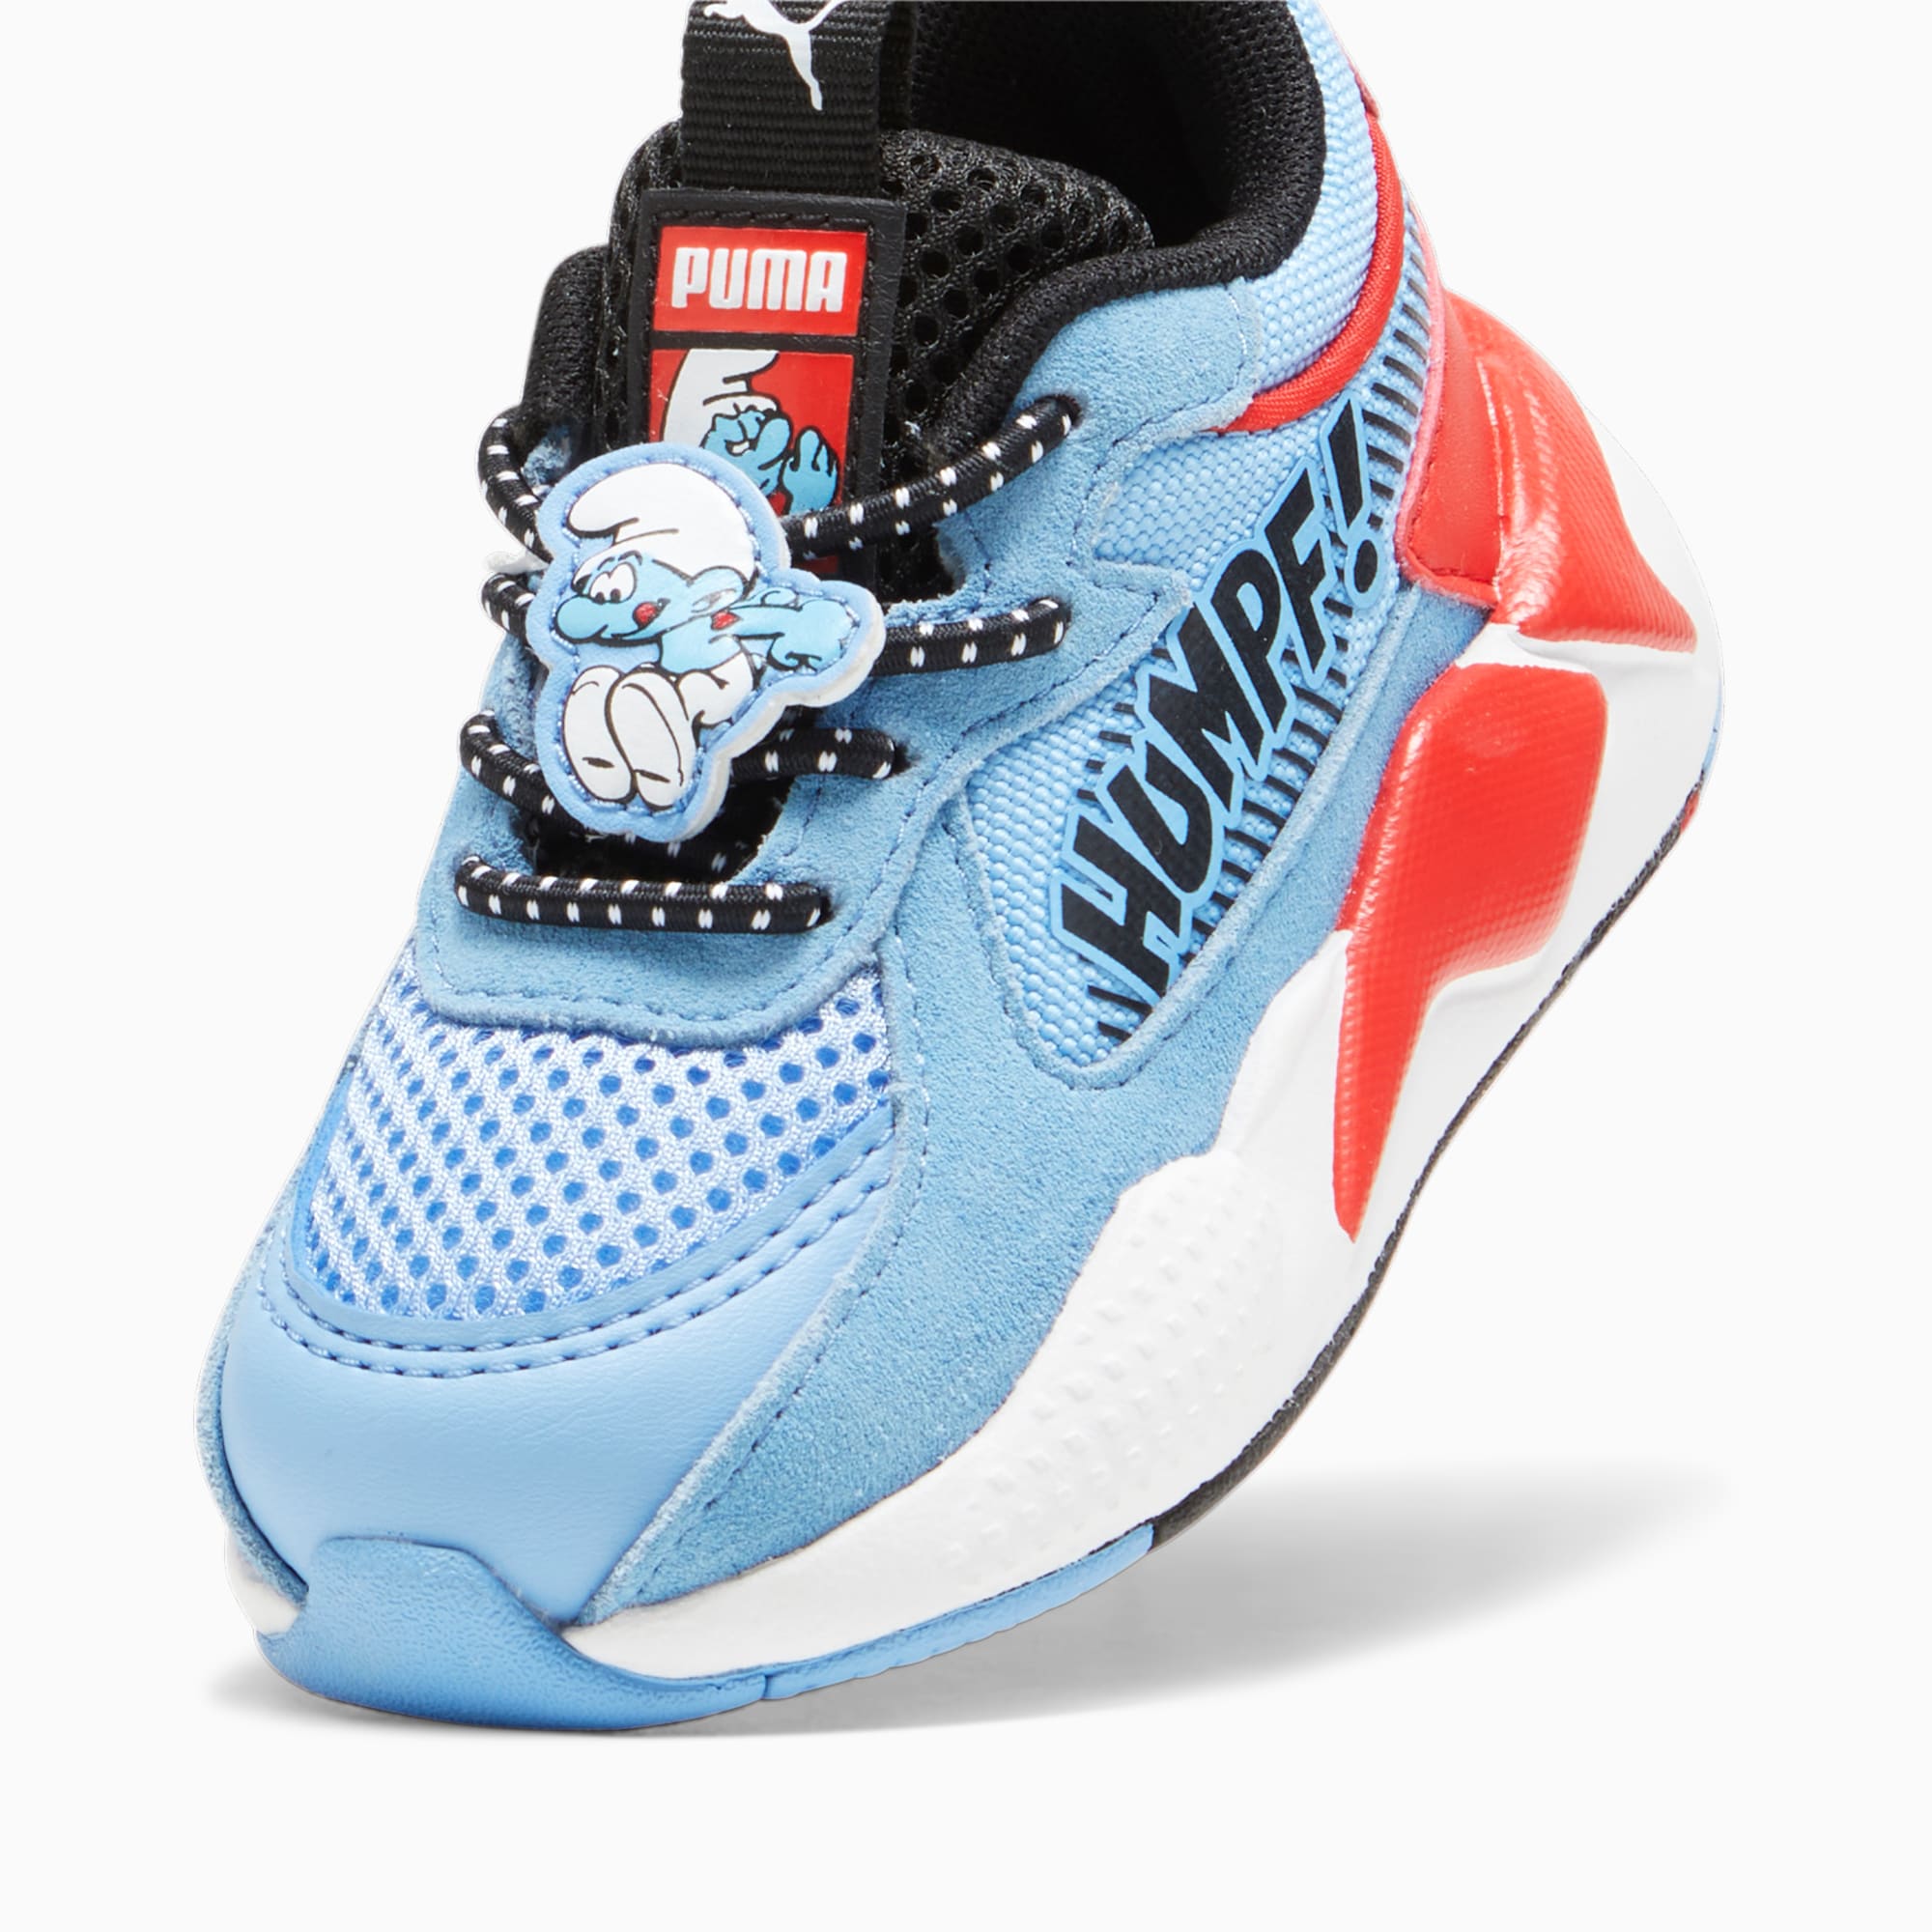 PUMA X The Smurfs Rs-x Toddlers' Sneakers, Light Blue/Red, Size 19, Shoes